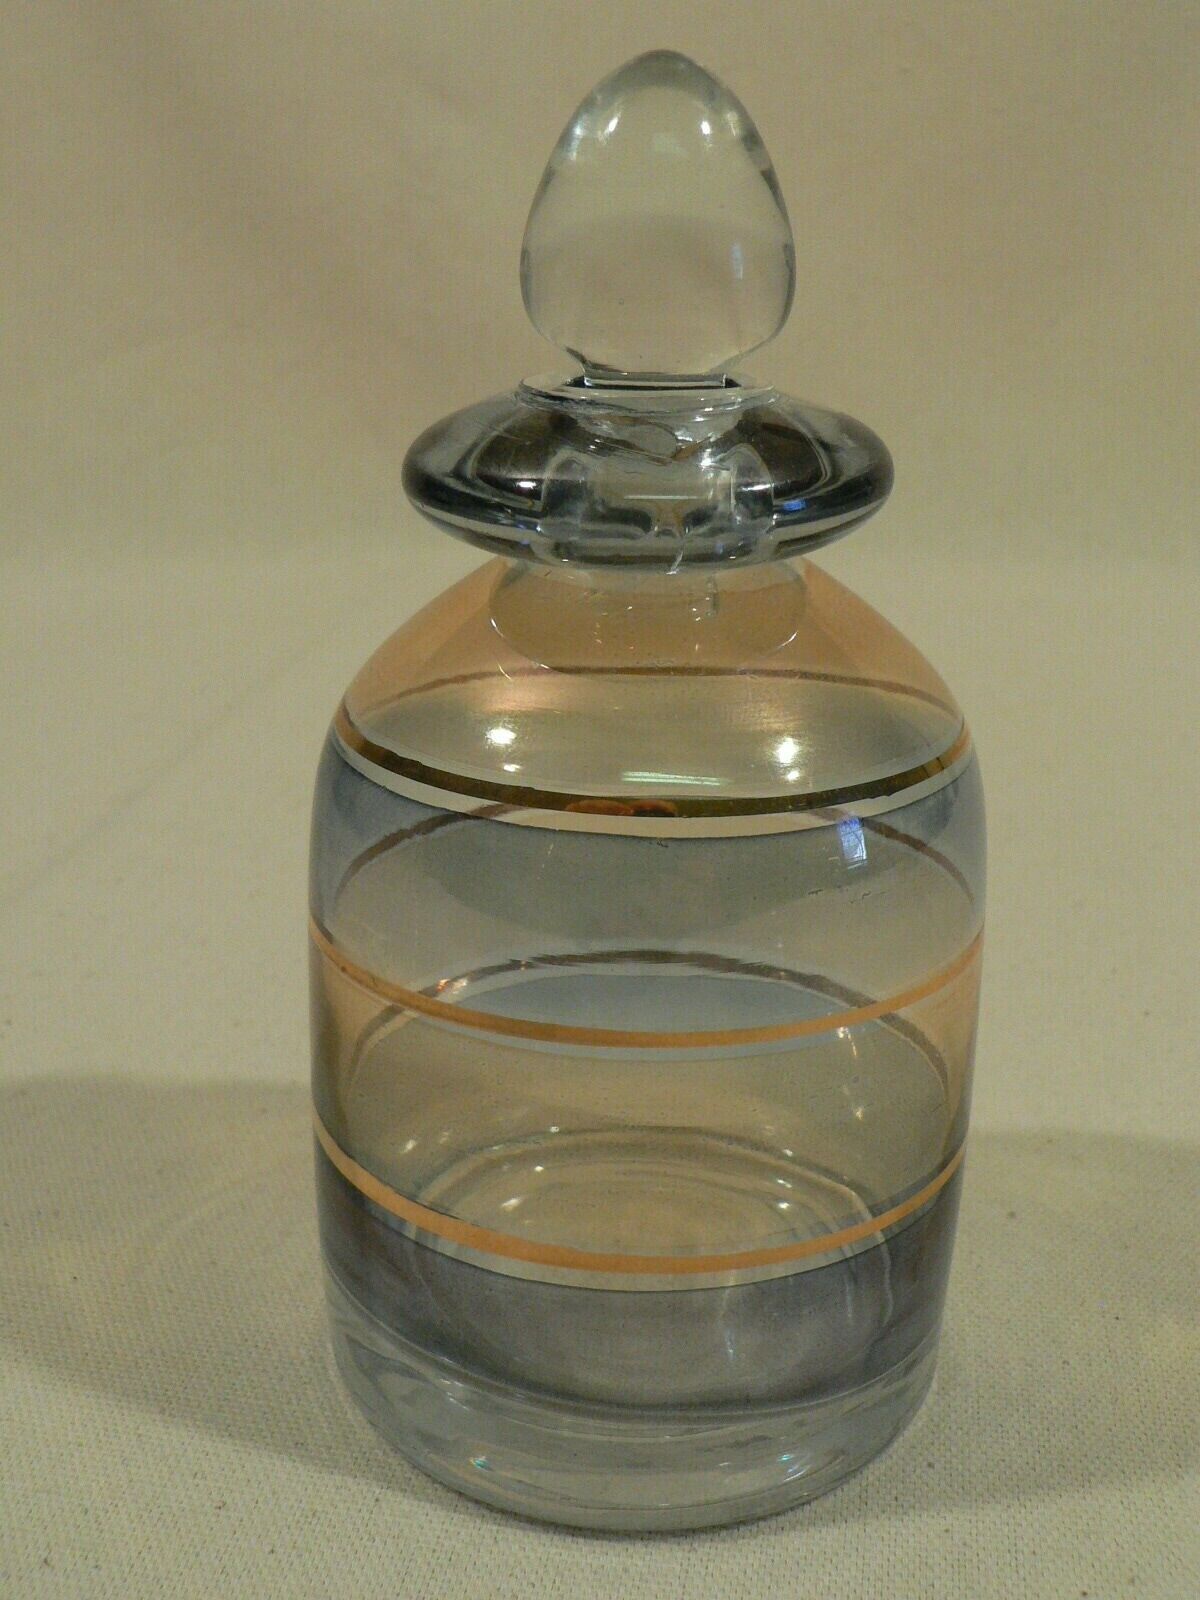 Primary image for Striped ornate vintage Perfume bottle w/ glass stopper